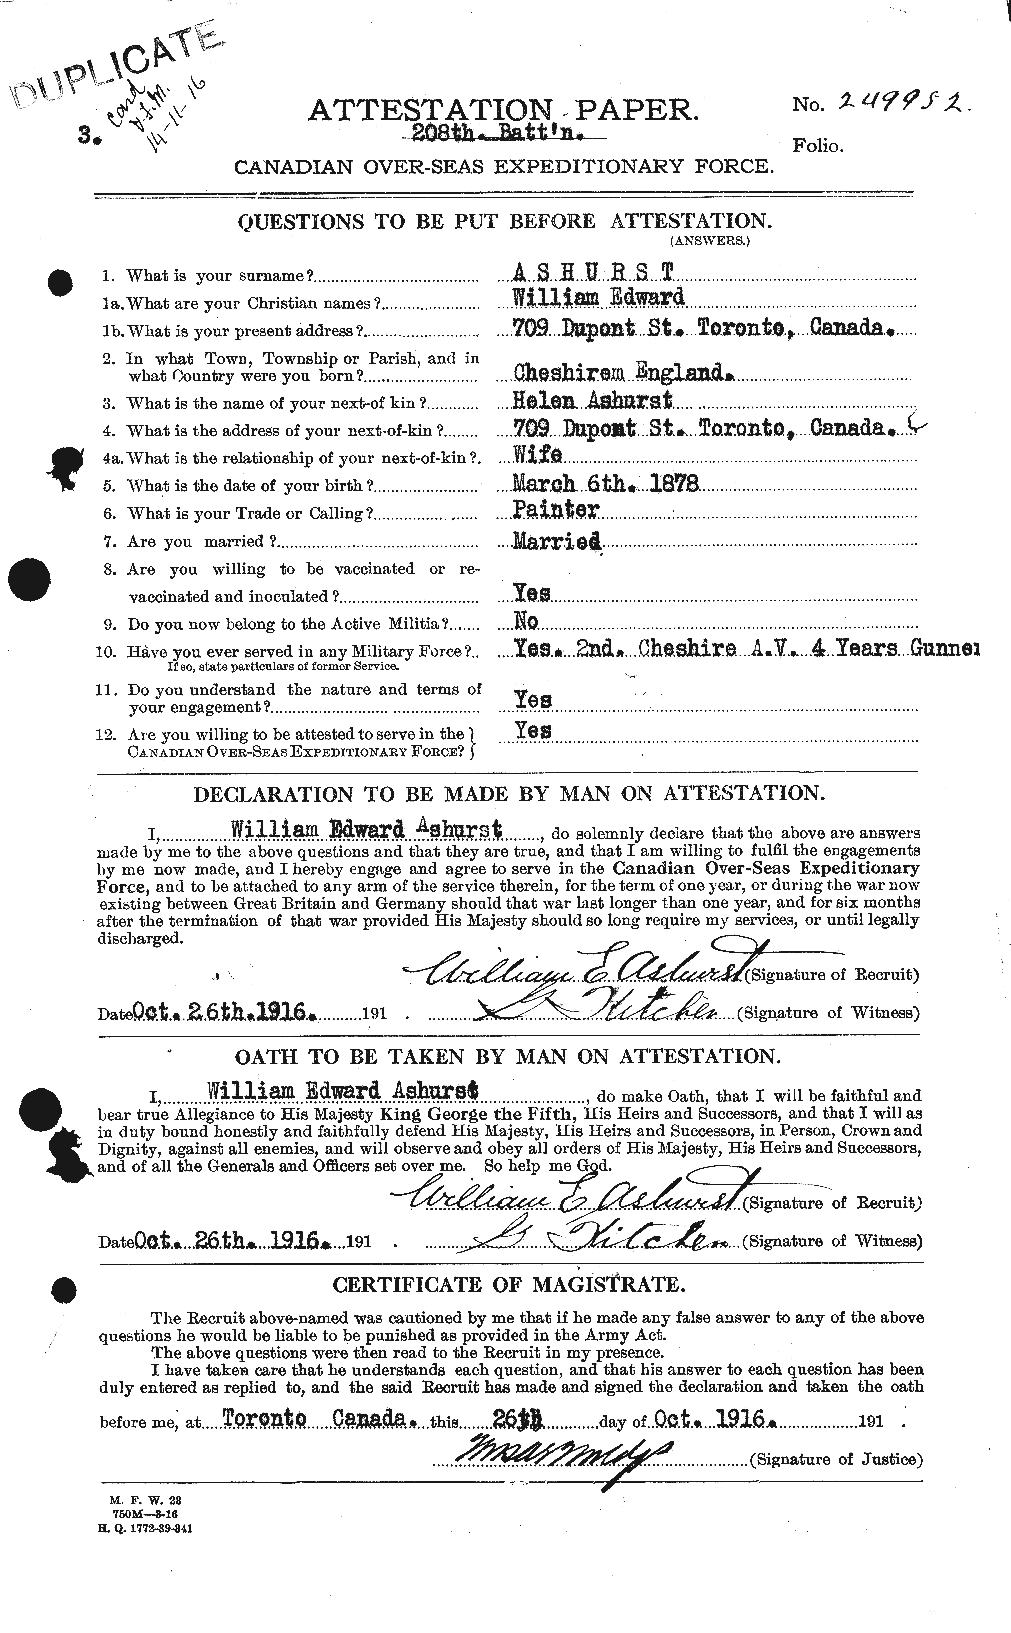 Personnel Records of the First World War - CEF 223772a